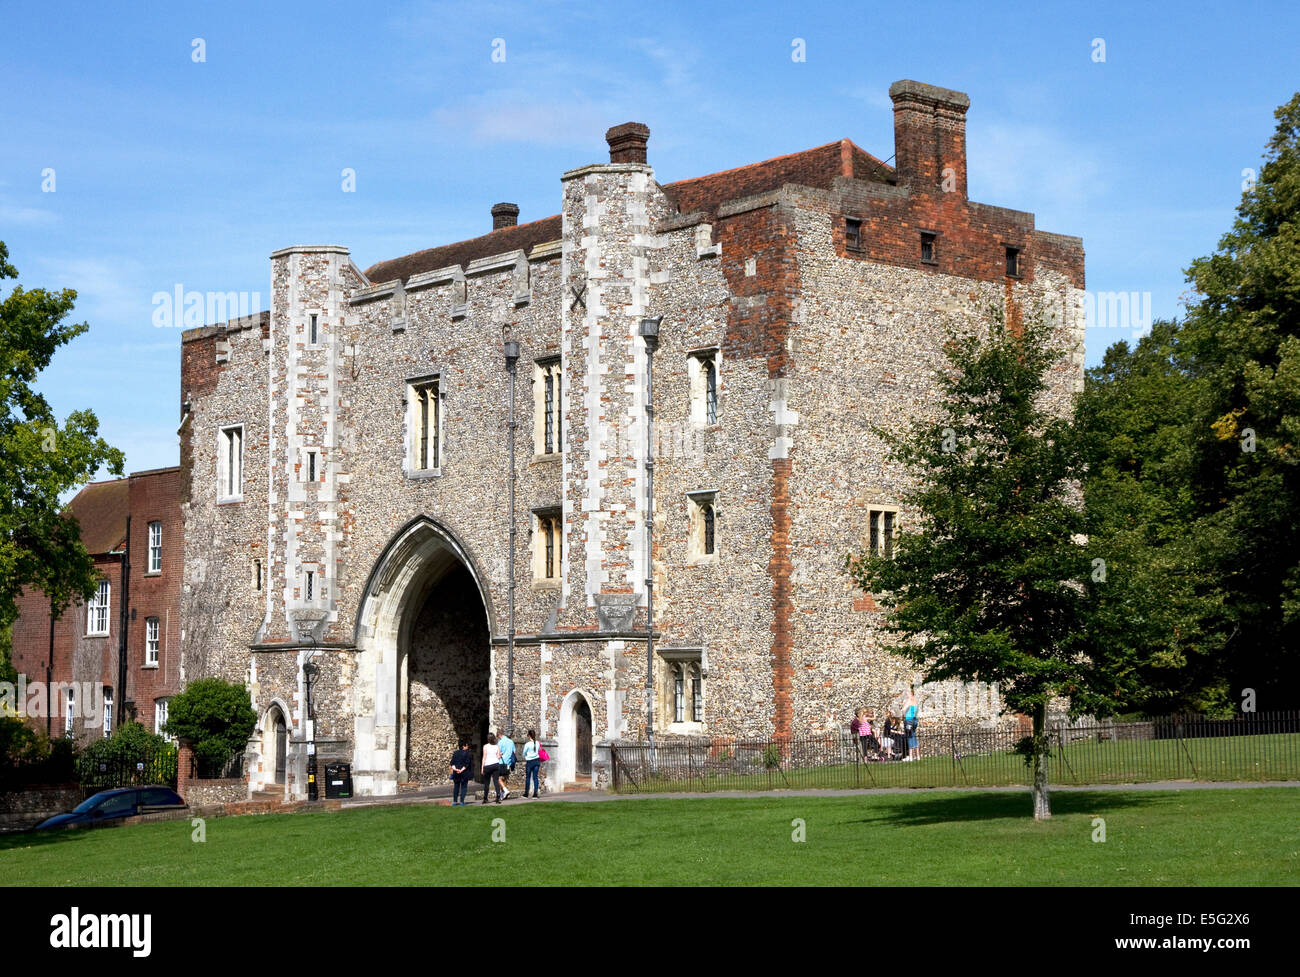 St Albans Abbey Gatehouse, formerly part of monastery, then town gaol, now part of St Albans School, St Albans, Hertfordshire UK Stock Photo